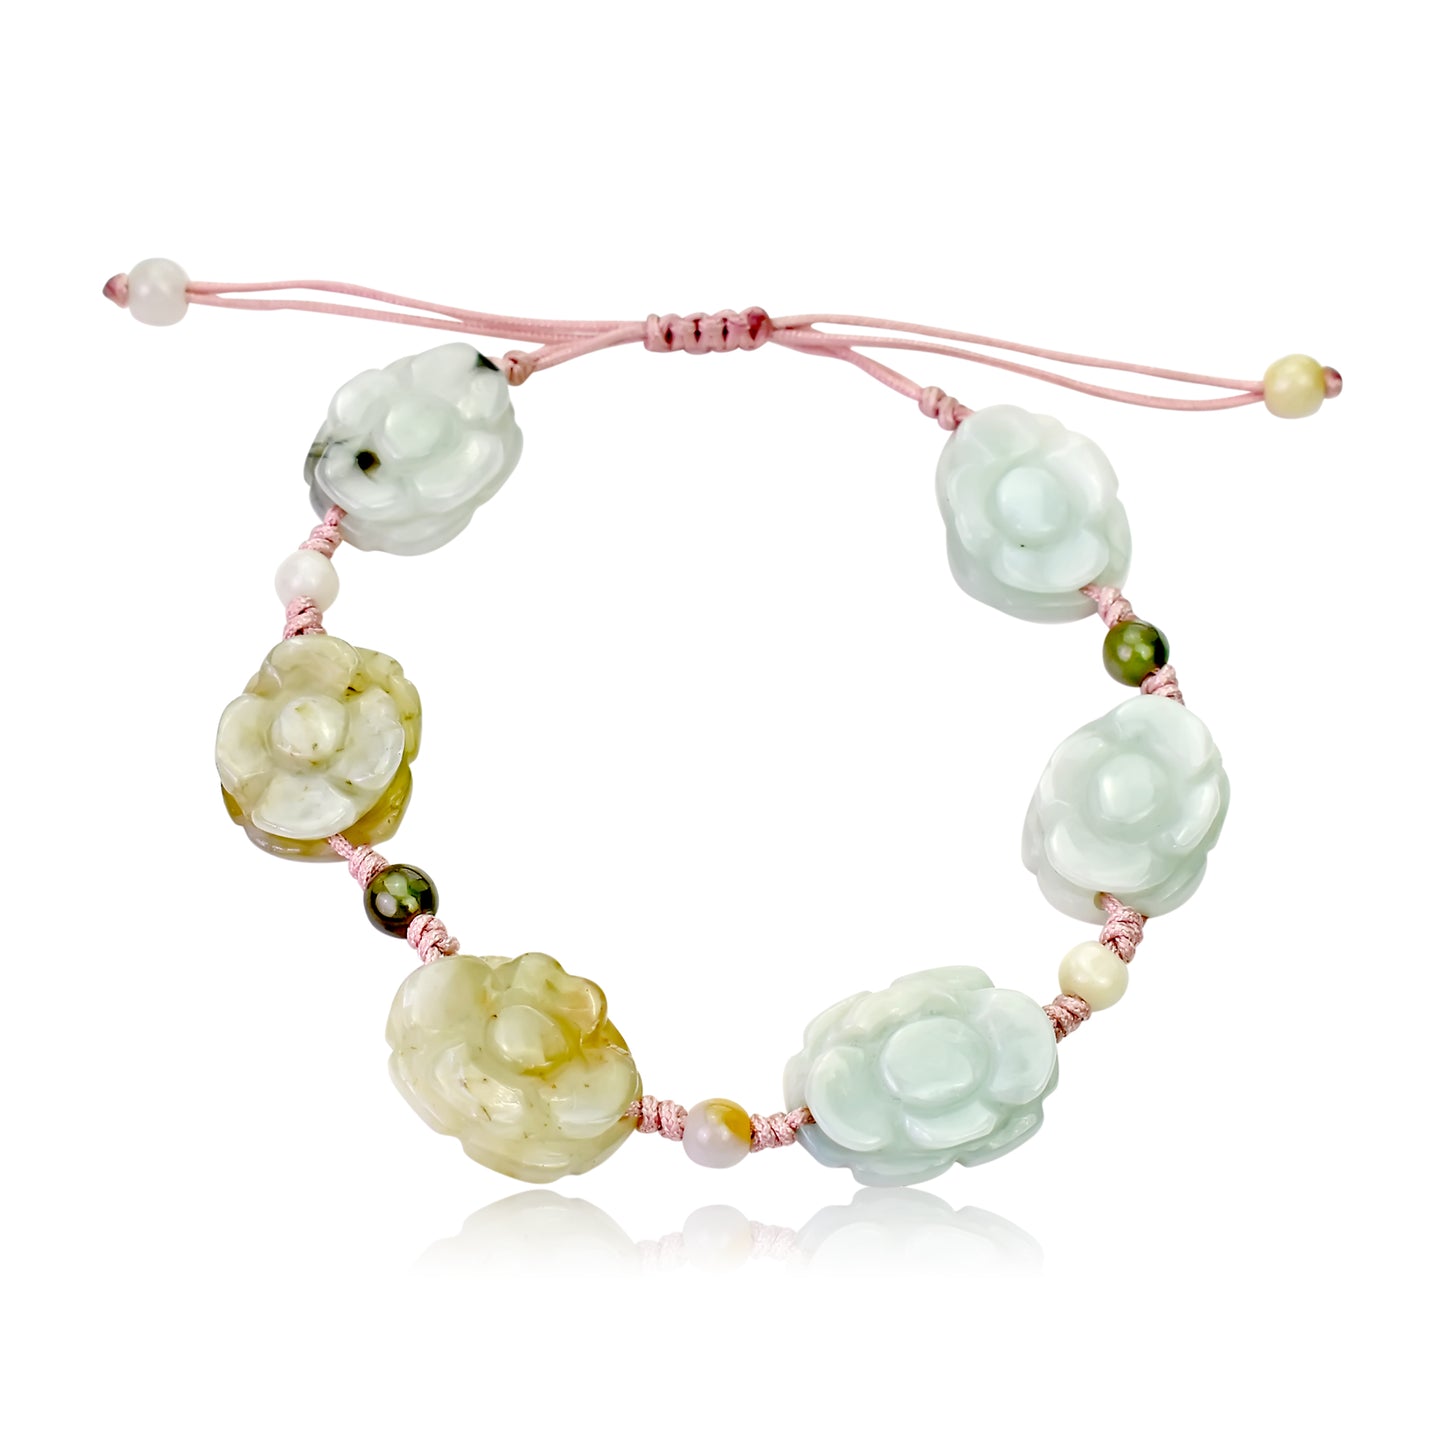 Get the Look You Love with Purity of Life: Waterlily Jade Bracelet